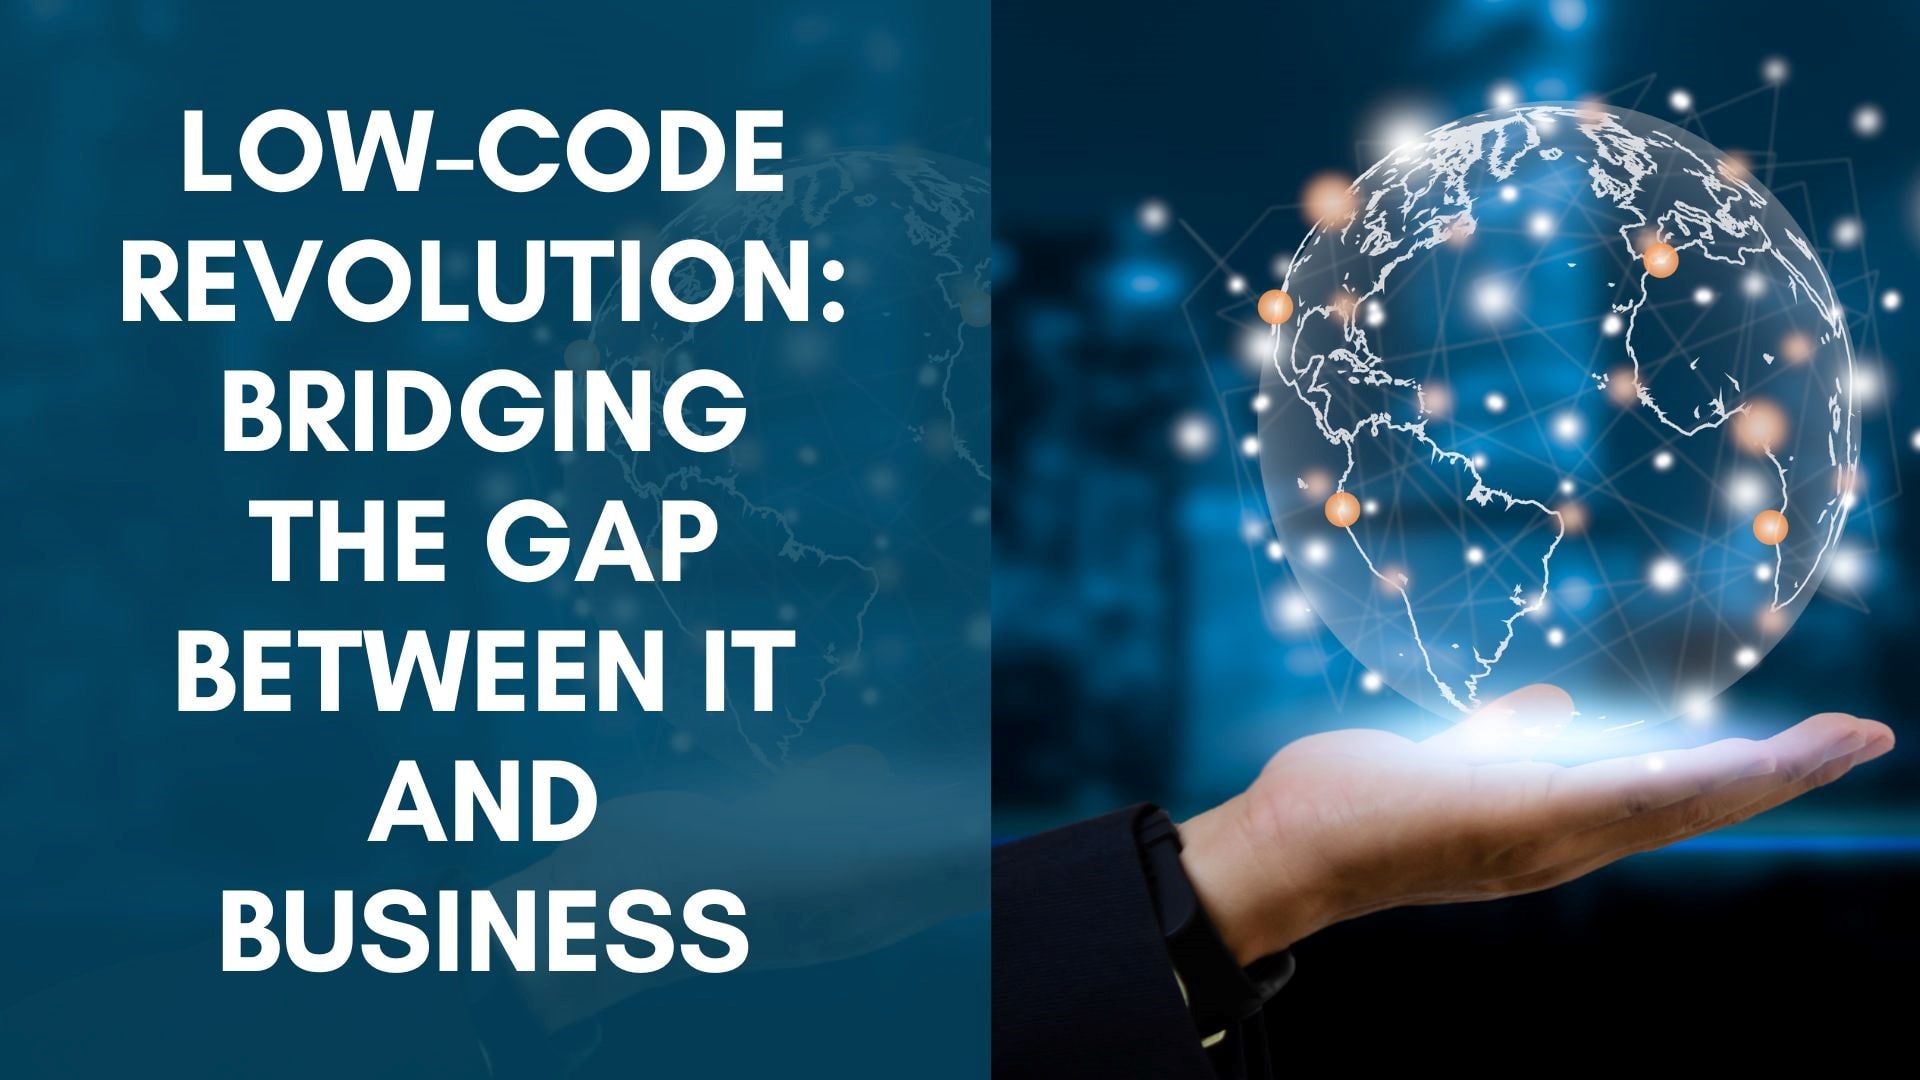 Low-Code Revolution: Bridging the Gap Between IT and Business